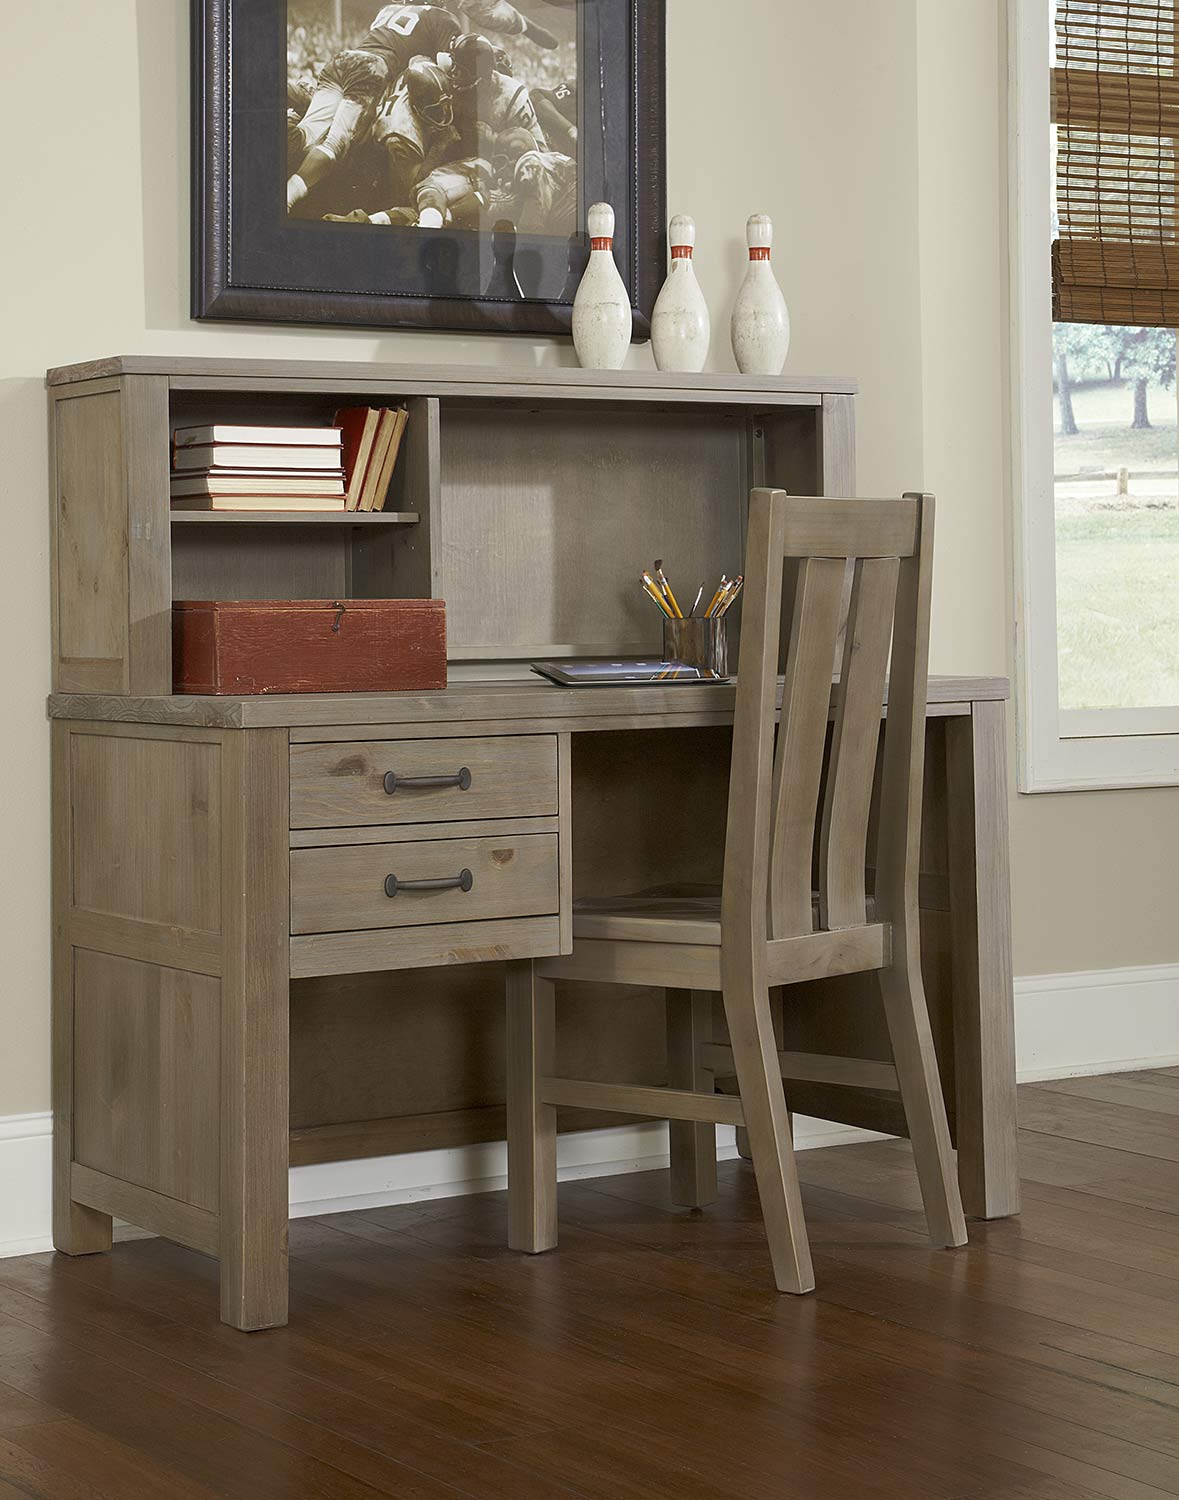 NE Kids Highlands Desk with Hutch And Chair - Driftwood